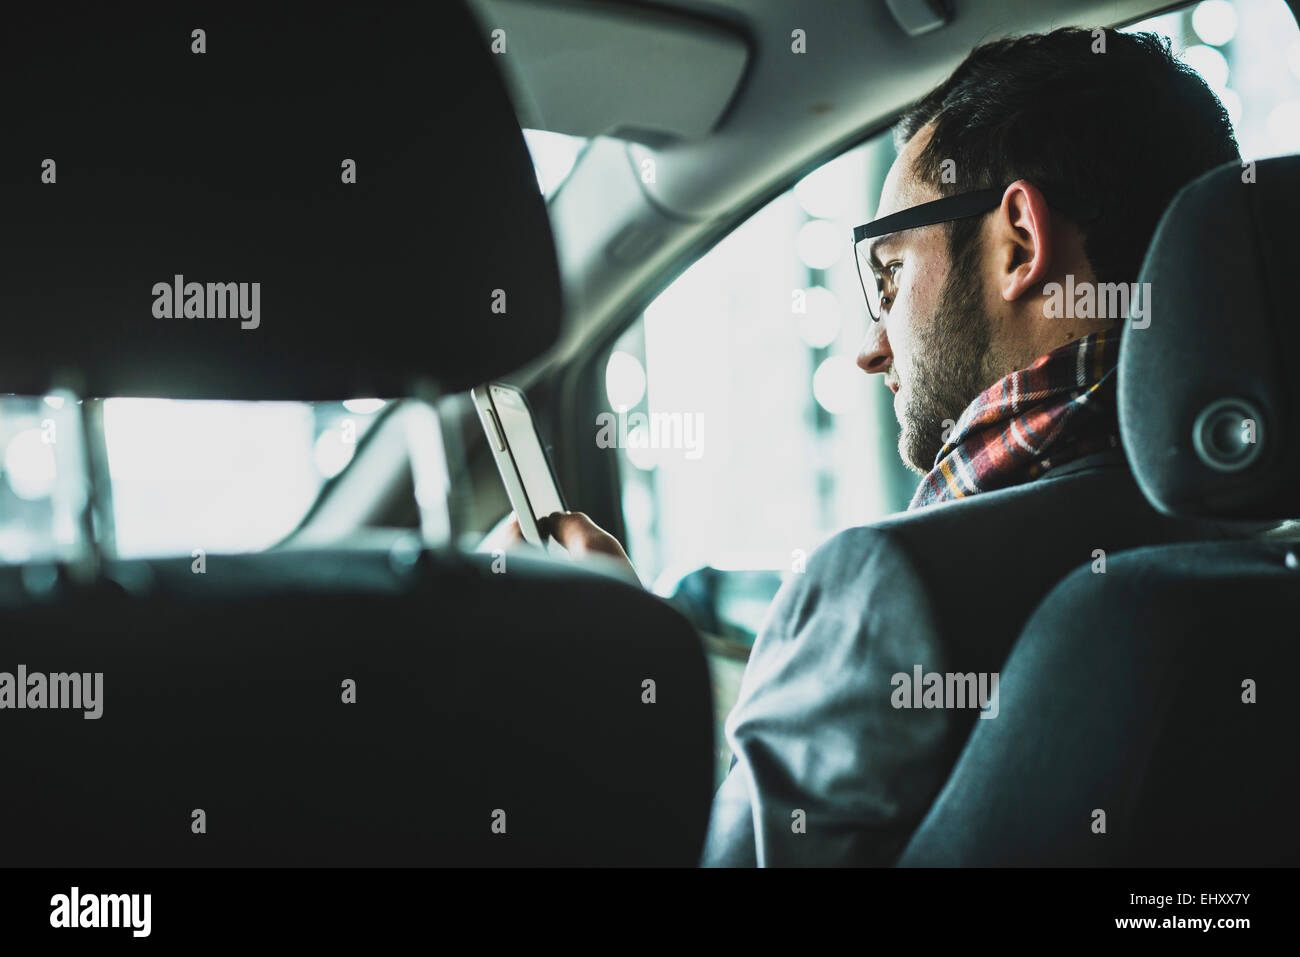 Young businessman in car looking on cell phone Banque D'Images